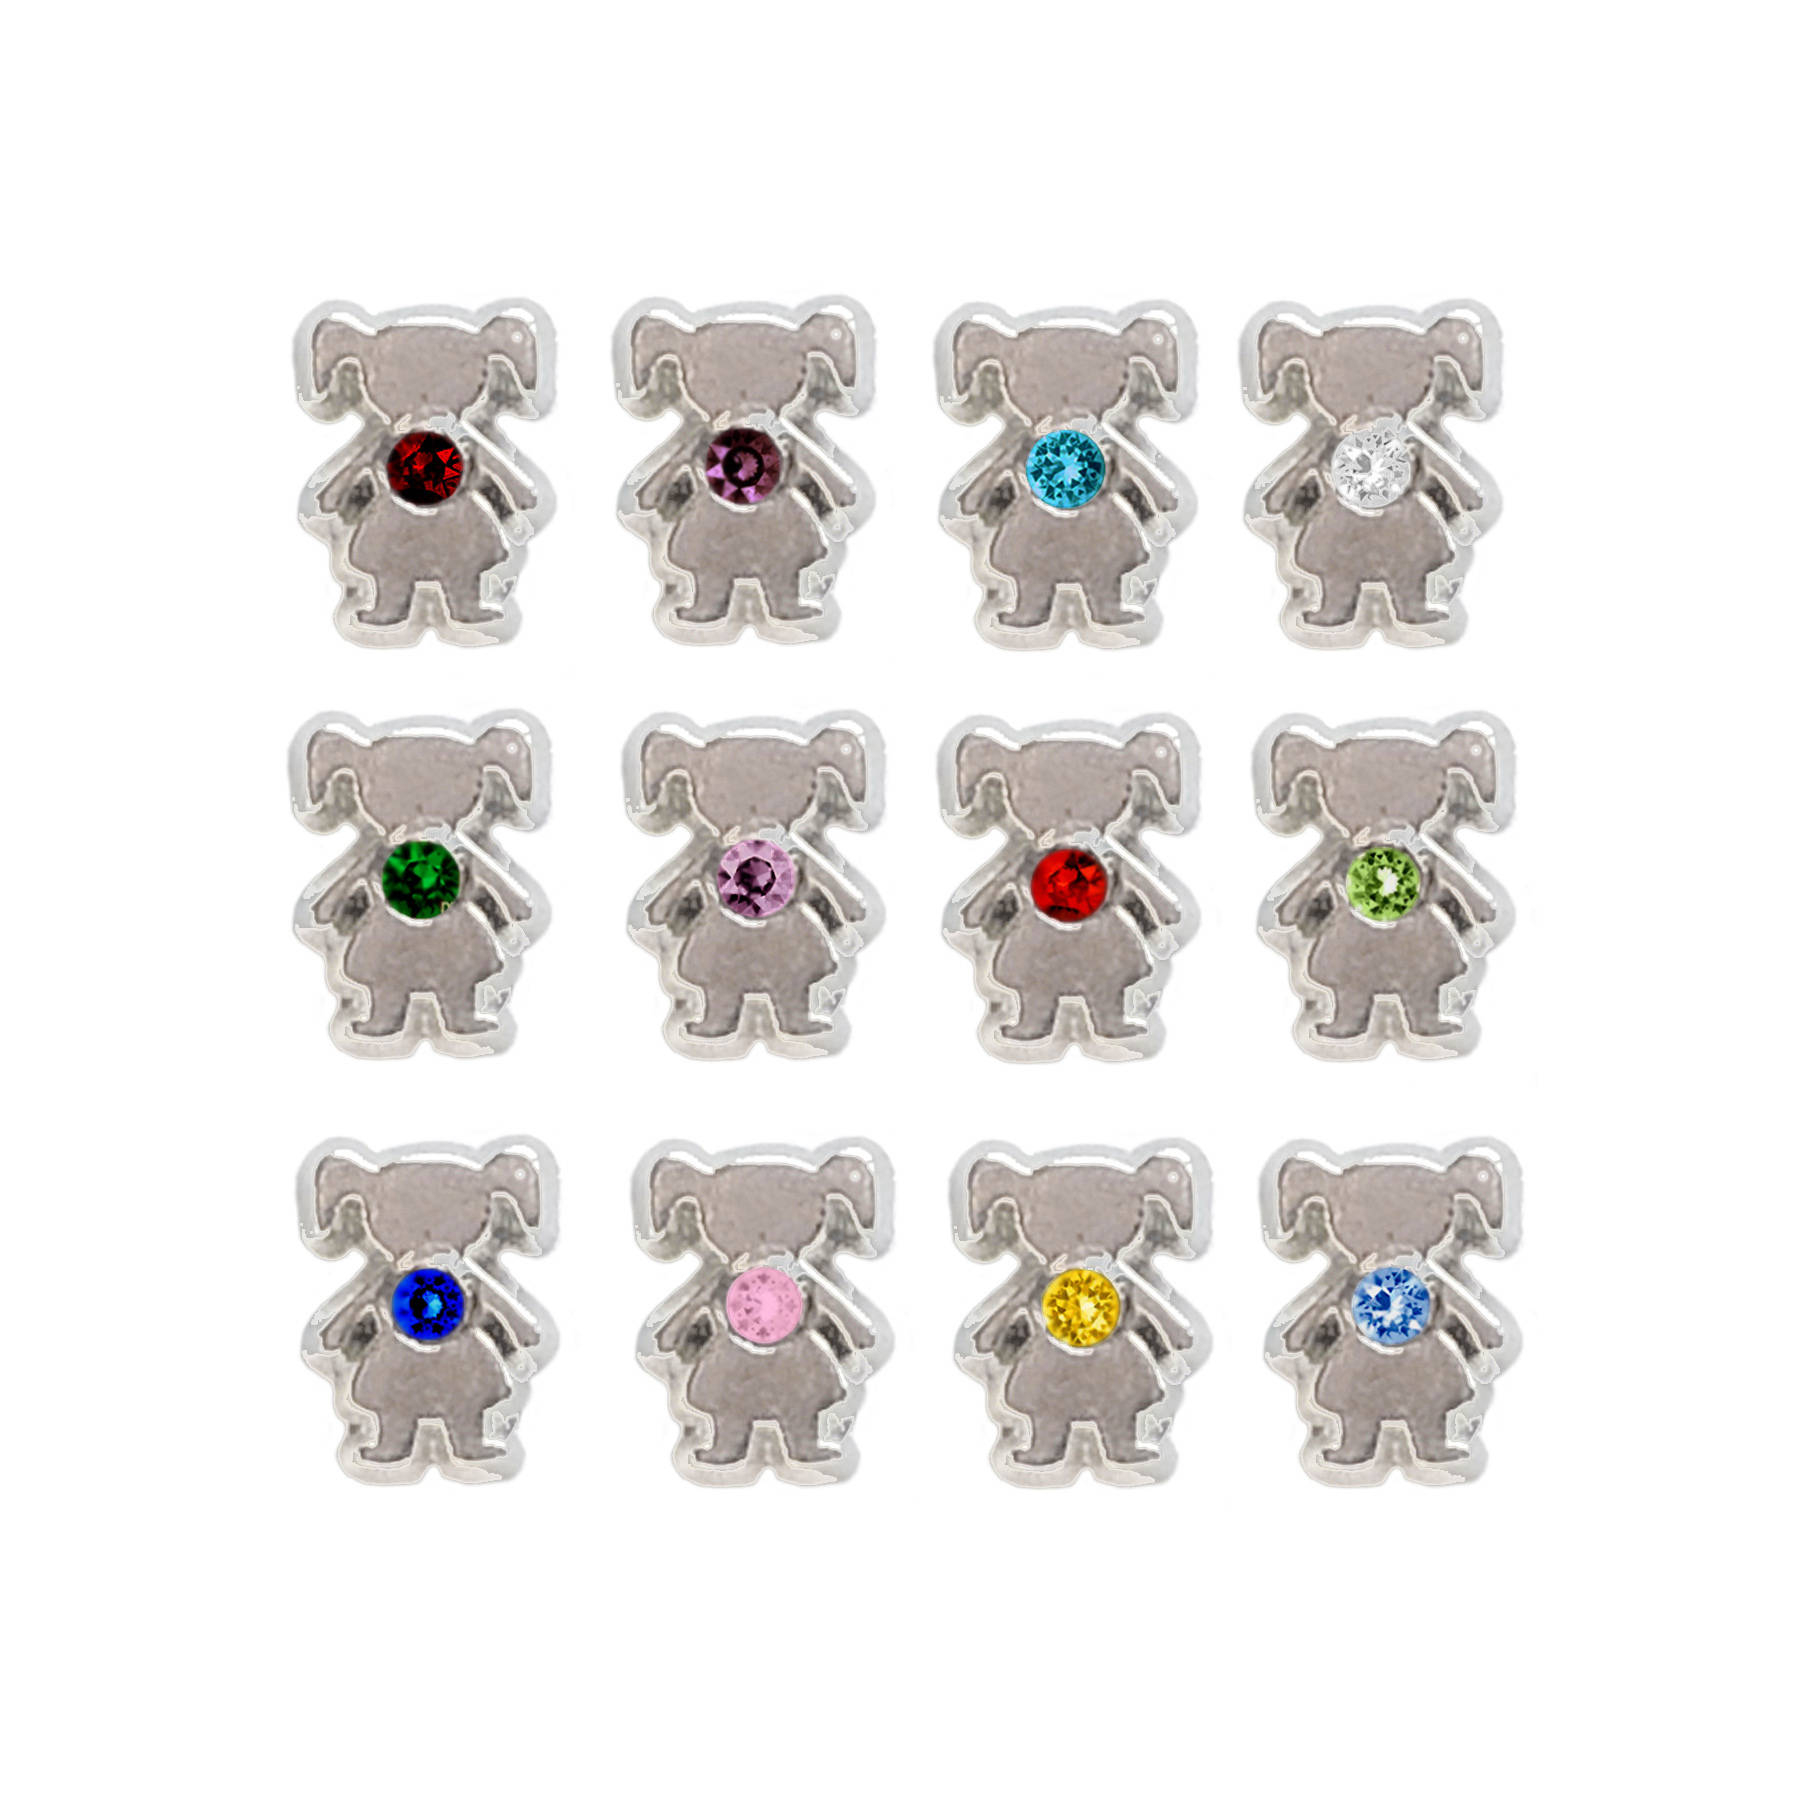 Cheap Origami Owl Charms Girl Birthstone Floating Charm Fits Origami Owl Lockets